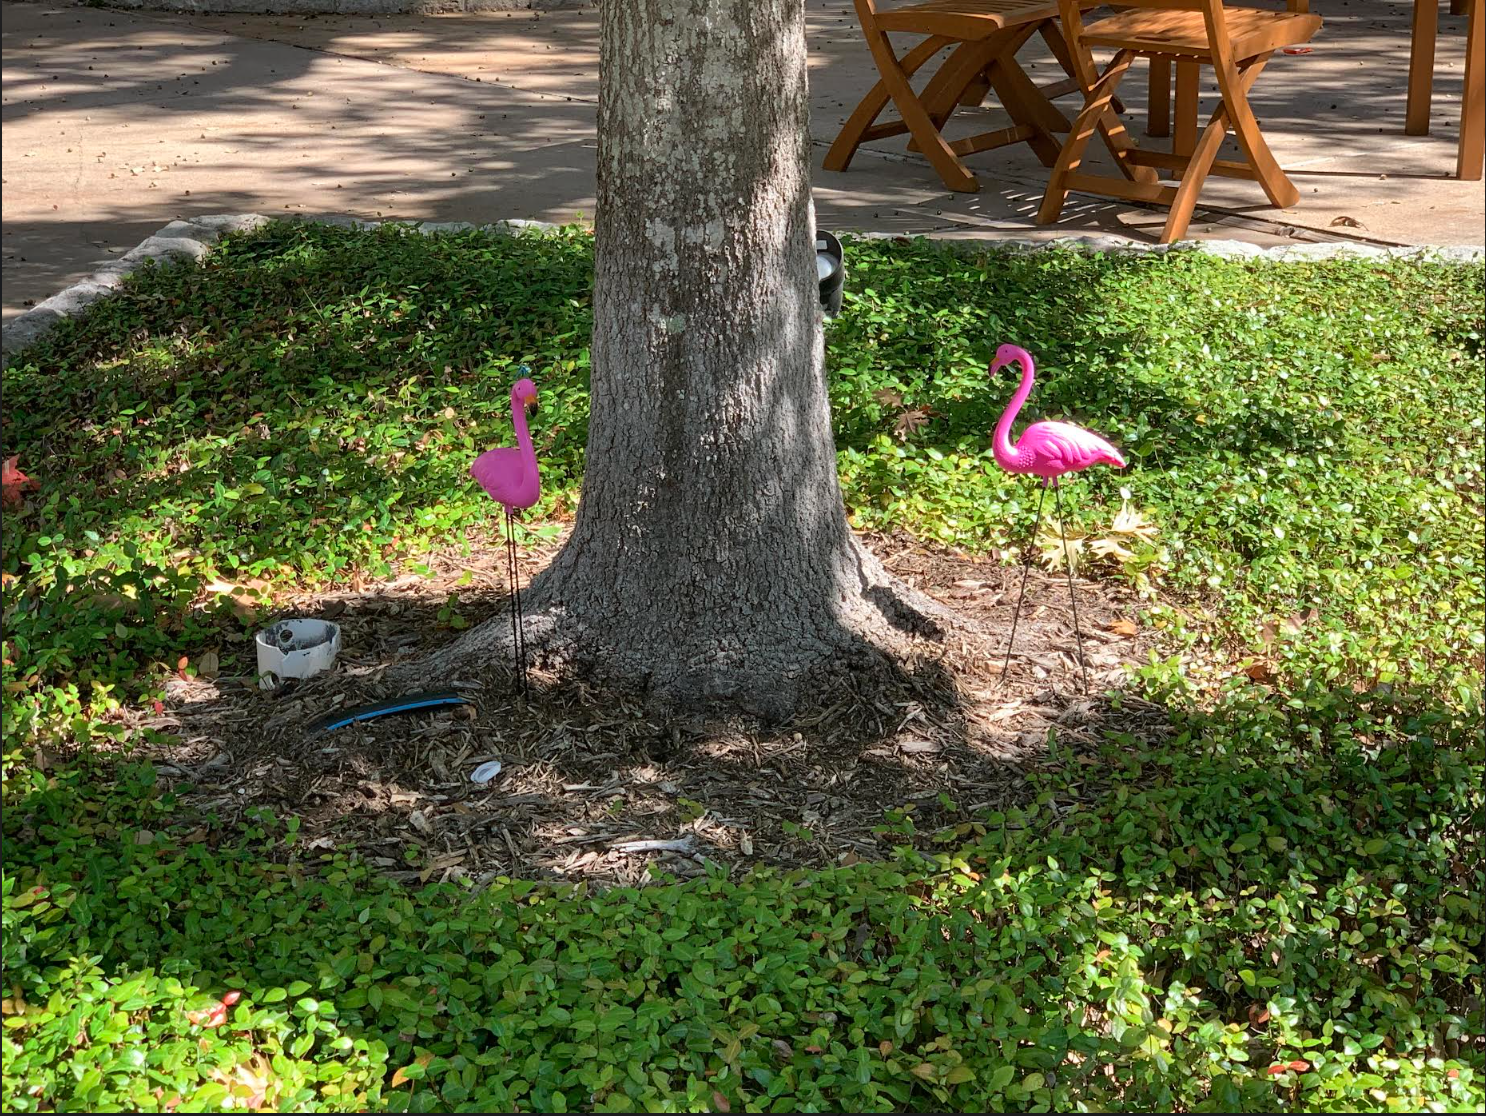 On Oct. 23, students arriving at school were greeted with a flamboyance of flamingos.